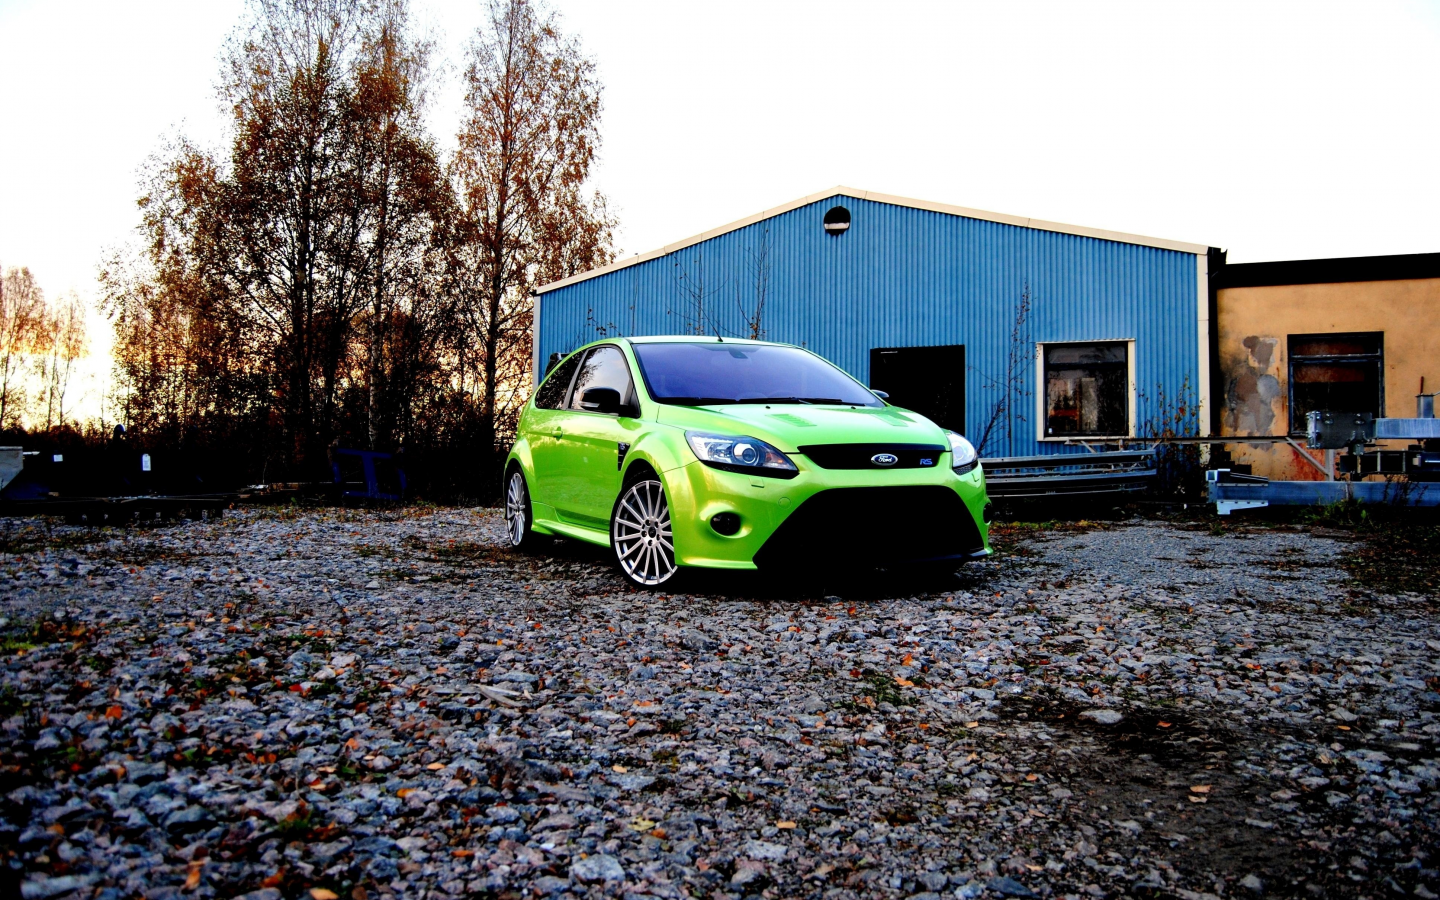 focus, дом, rc, home, камешки, камни, ford, green